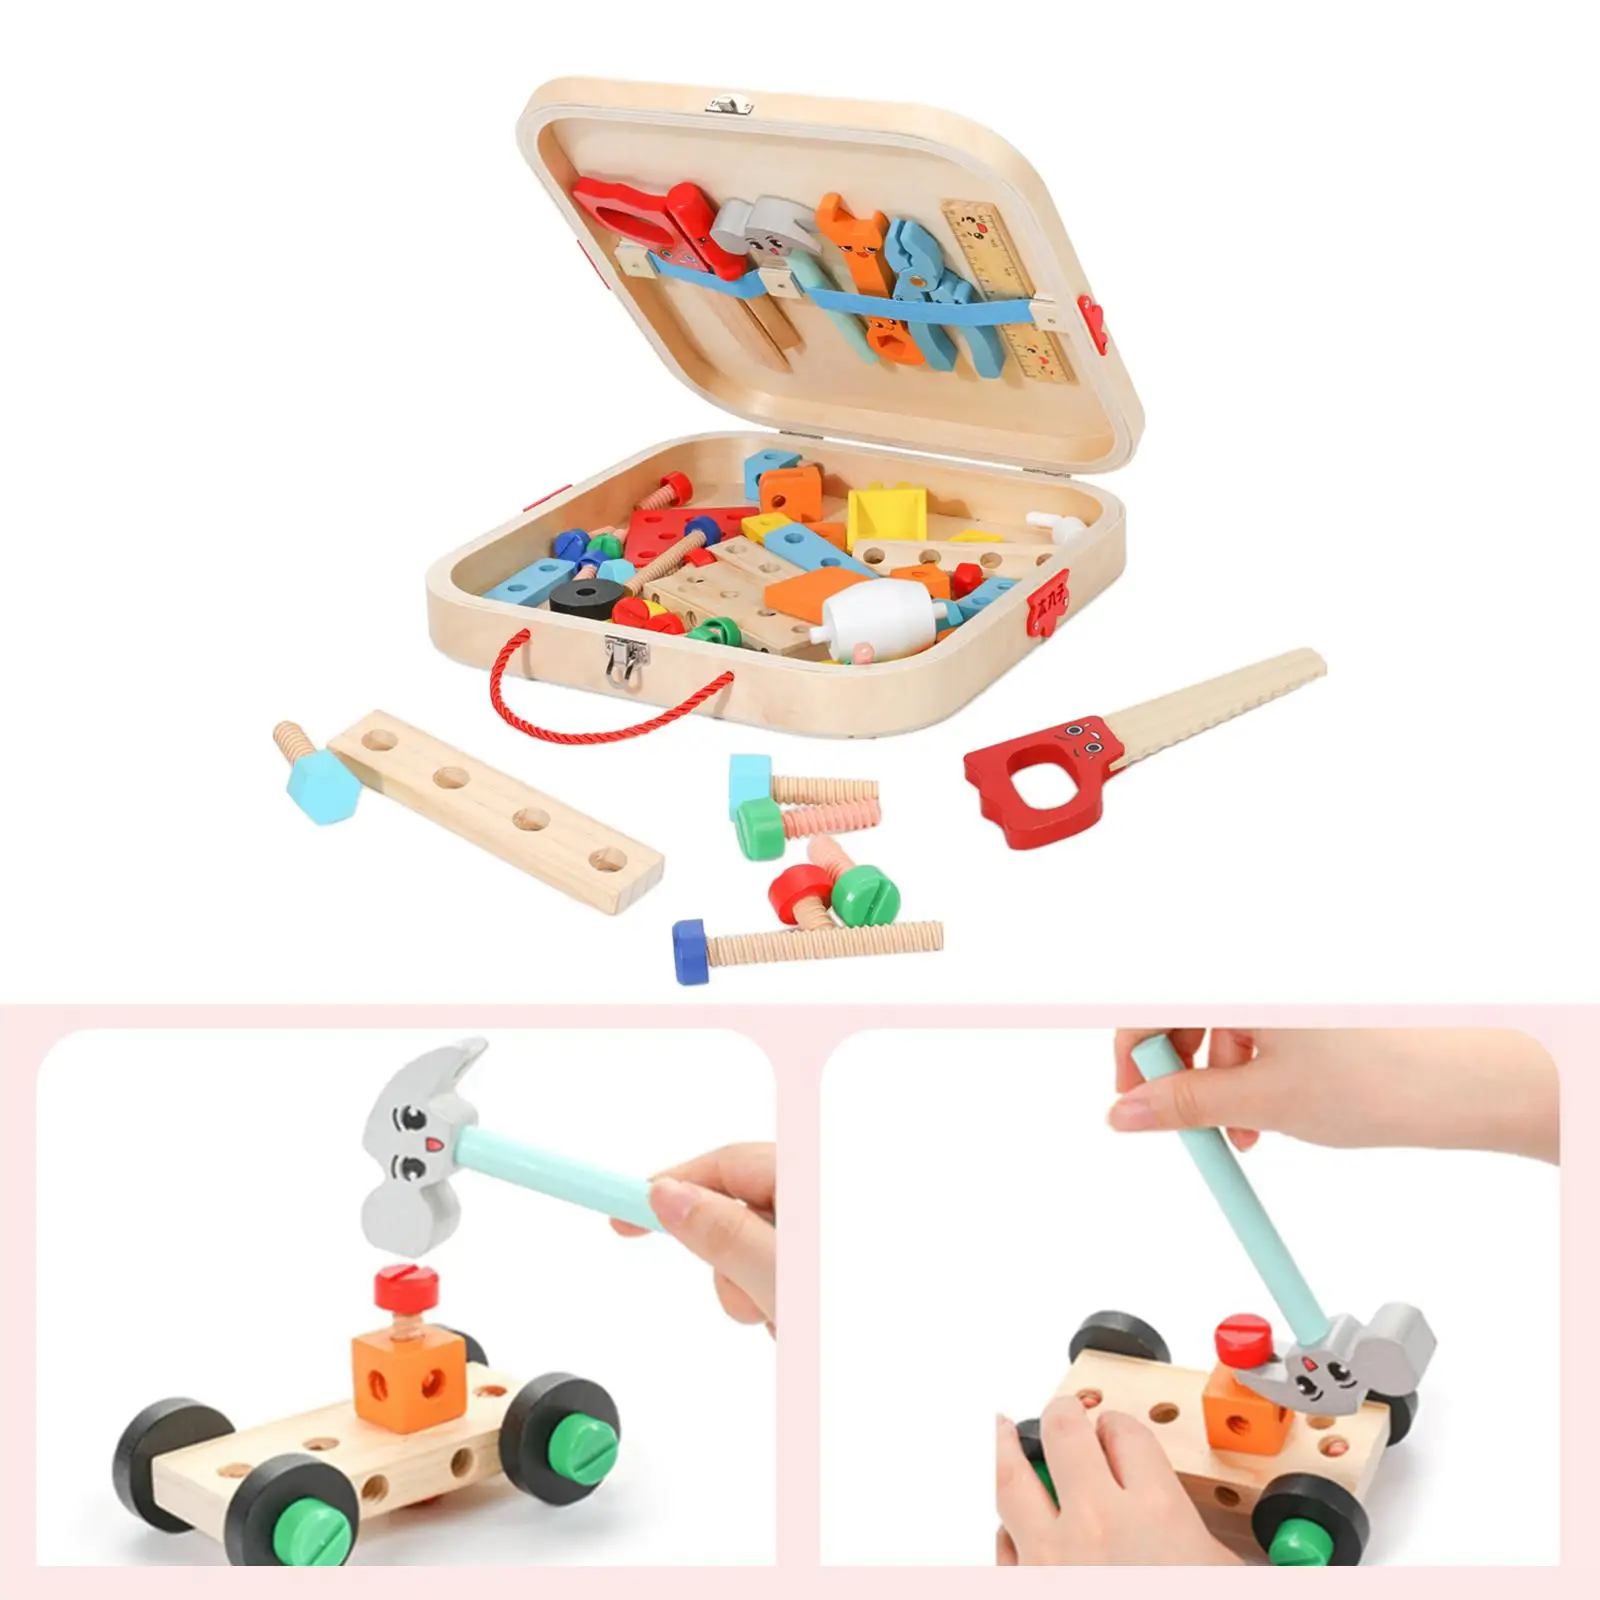 Wooden Kid Tool Set Develops Fine Motor Skills Smooth Construction Tool Toy Set for Living Room Home Bedroom Birthday Gift Kids